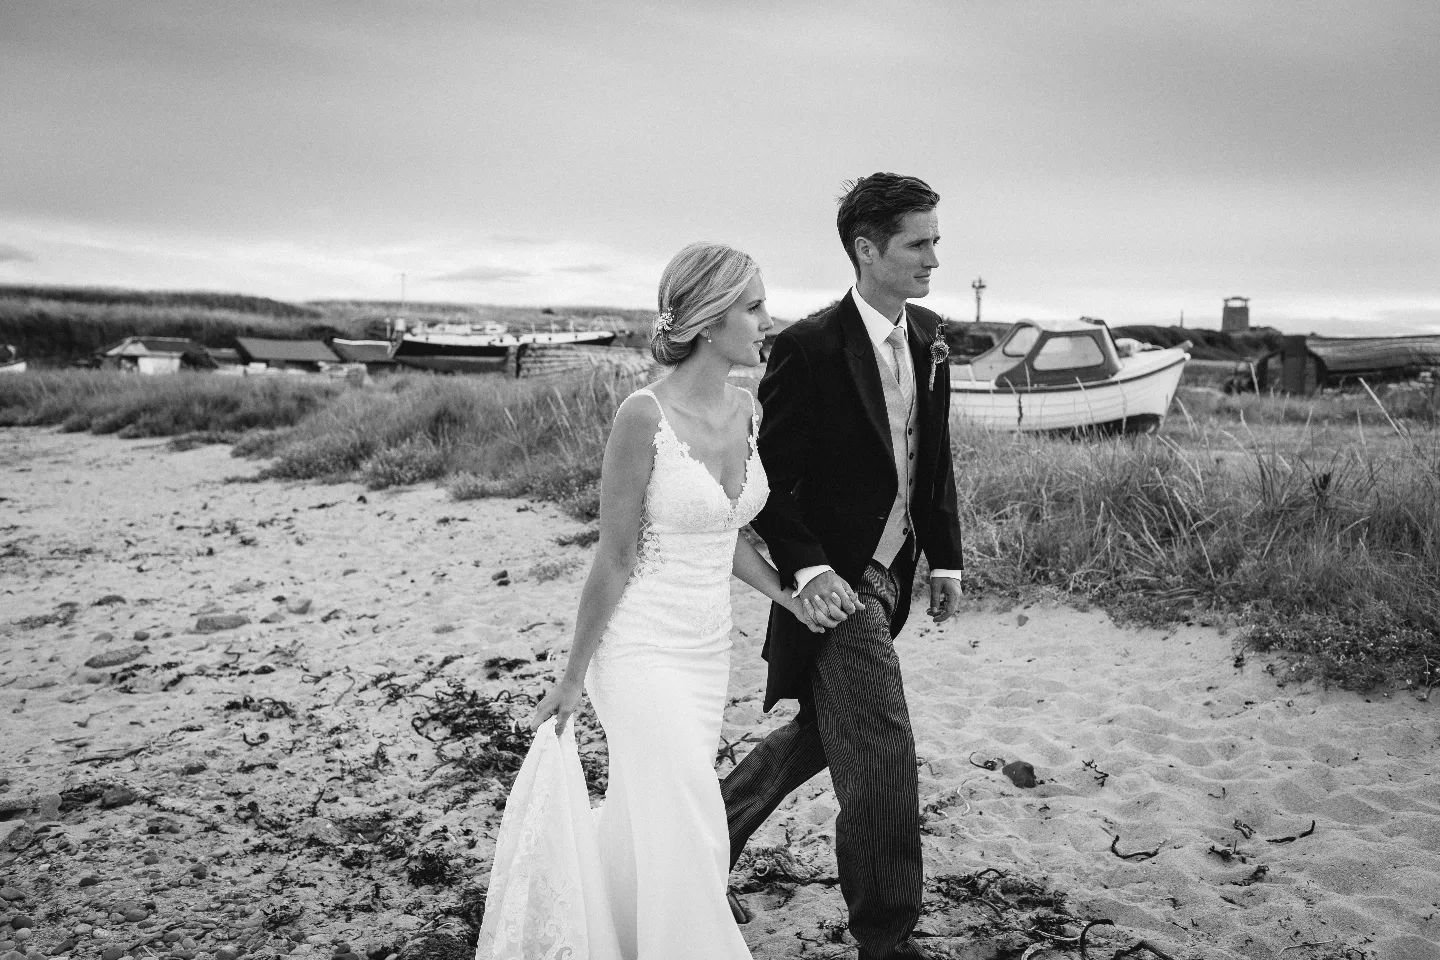 Taking 5 minutes away from the wedding hustle and bustle and what better place to go than the beach on the Holy Island of Lindisfarne on the Northumberland Coast.

#holyislandwedding
#northumberlandweddingphotographer
#blackandwhitephotography
#candi